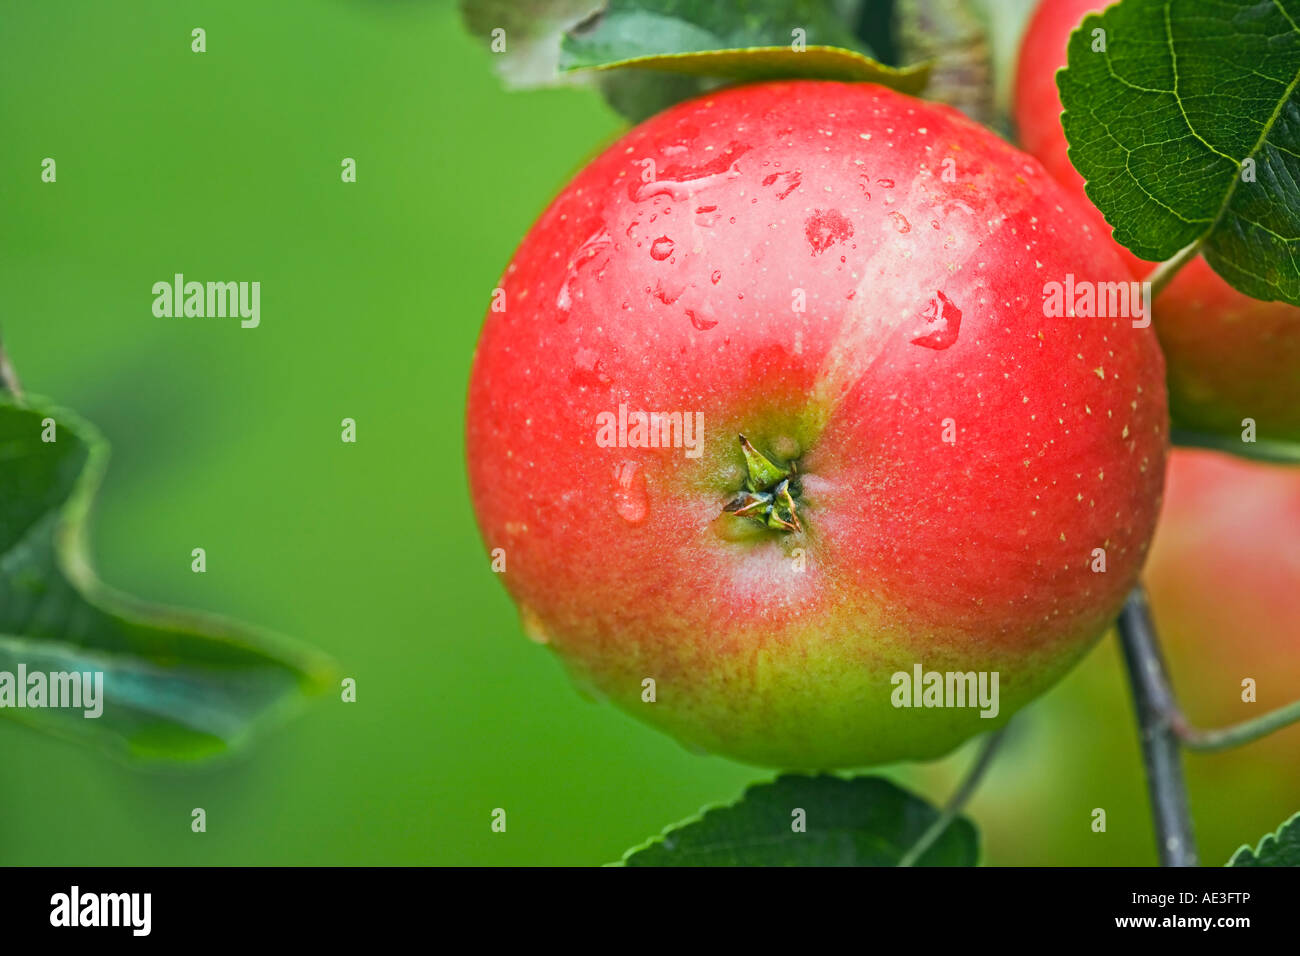 An eating apple variety 'Katya' ripening on the tree in an English orchard Stock Photo